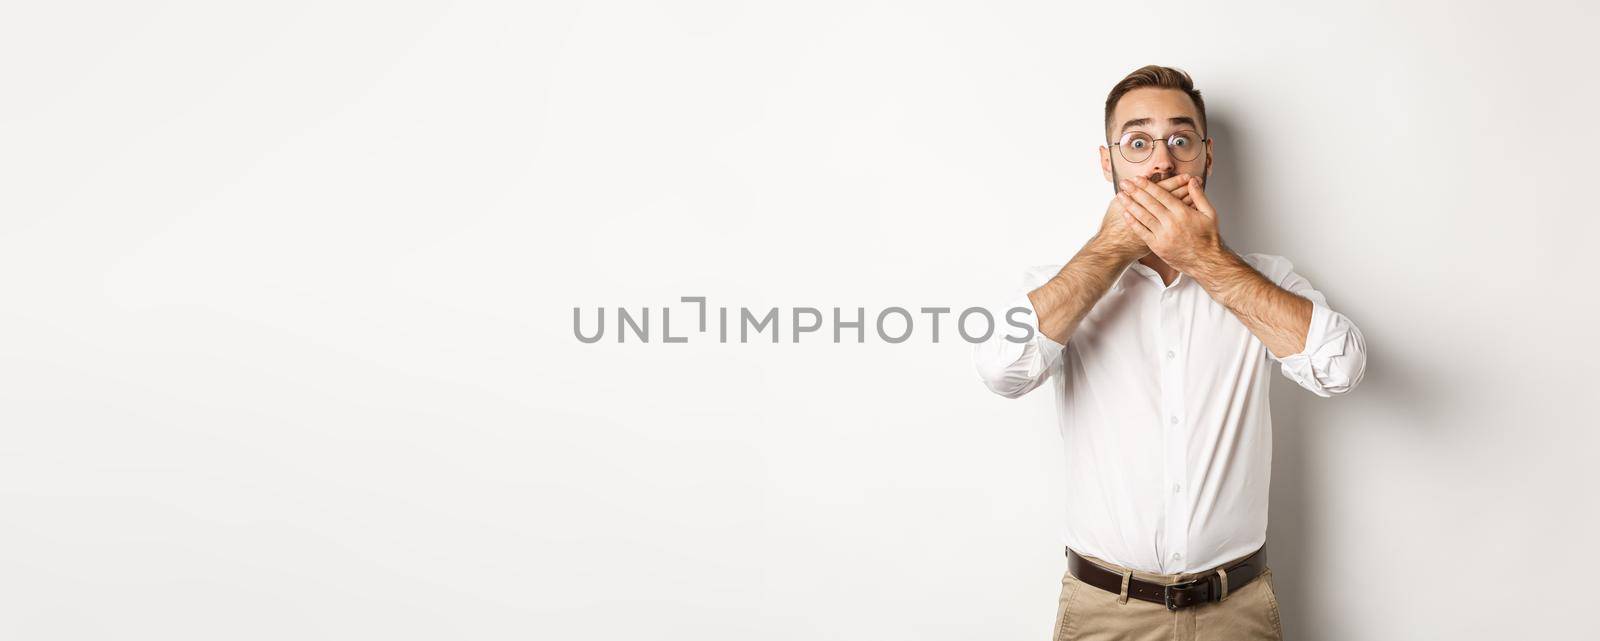 Shocked man gasping and looking at something in awe, covering mouth with hands, white background.